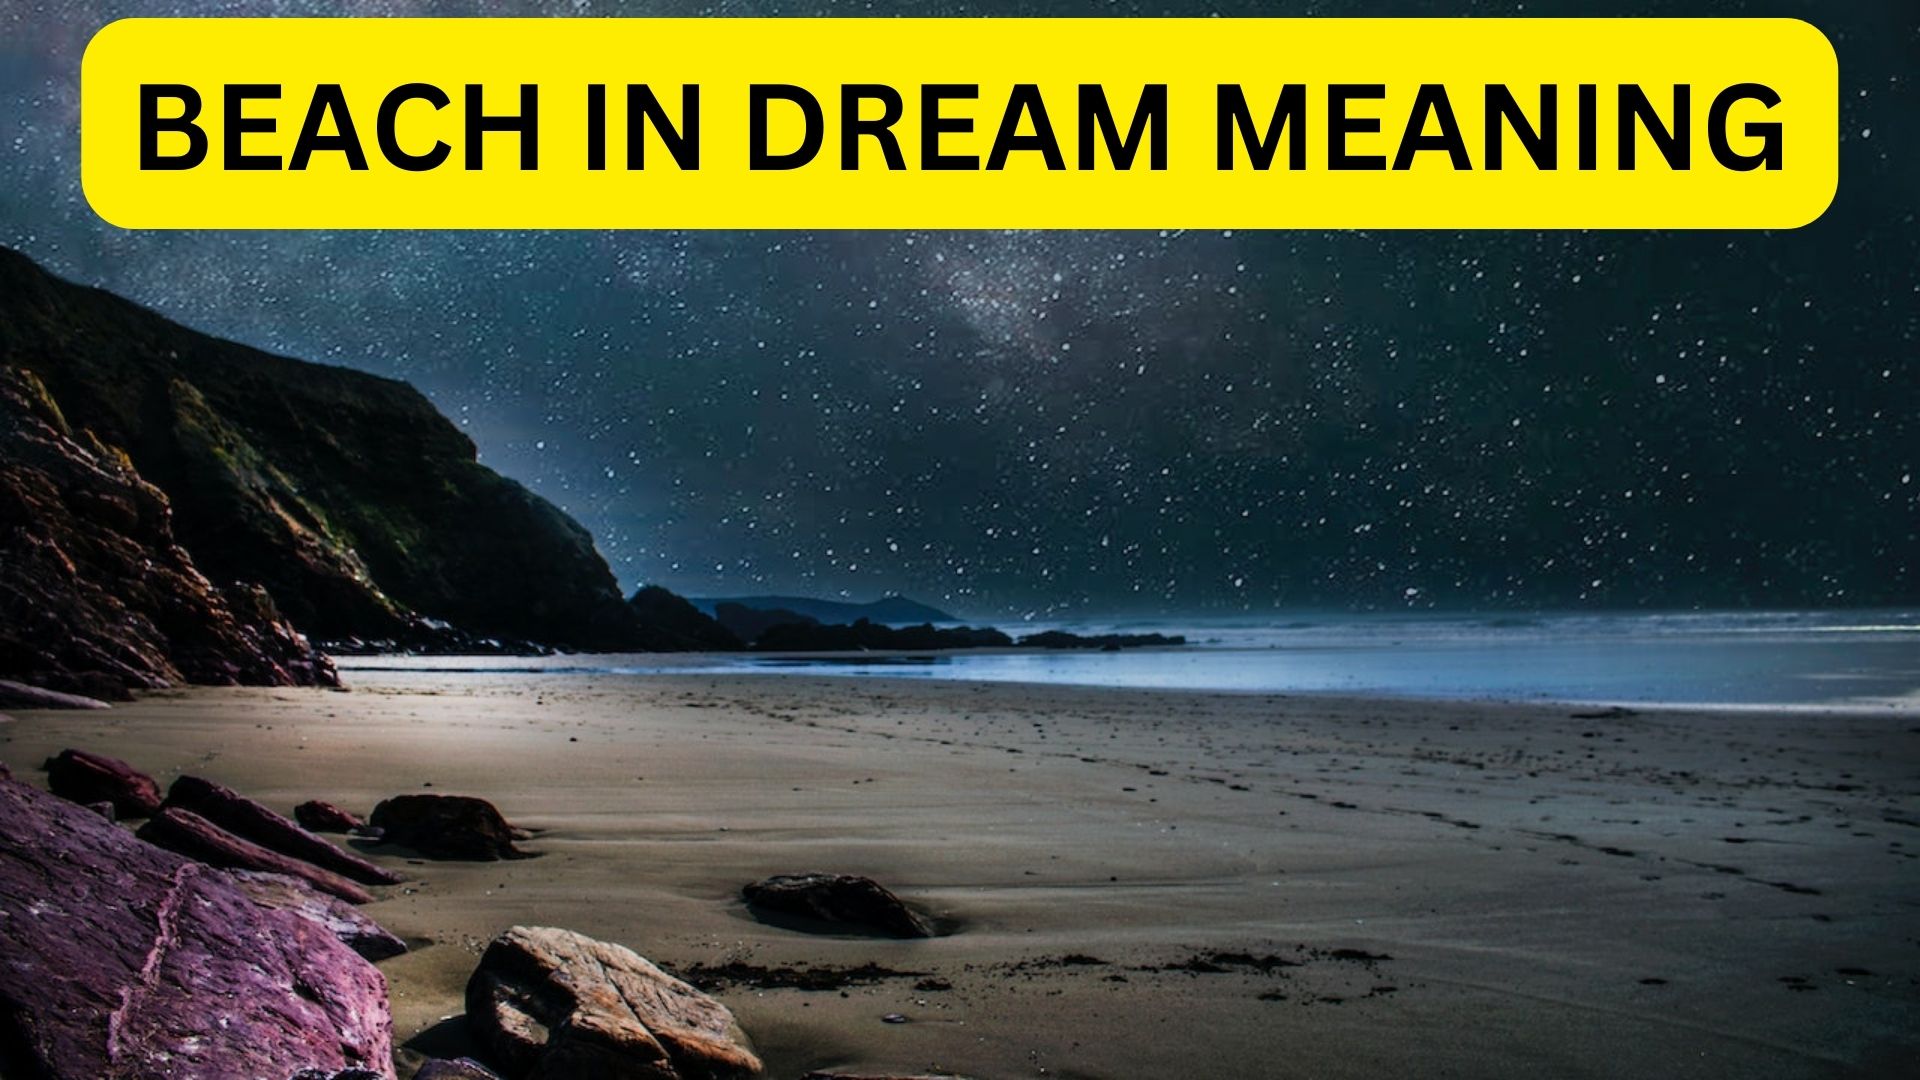 Beach In Dream Meaning - Great Things Are Yet To Come